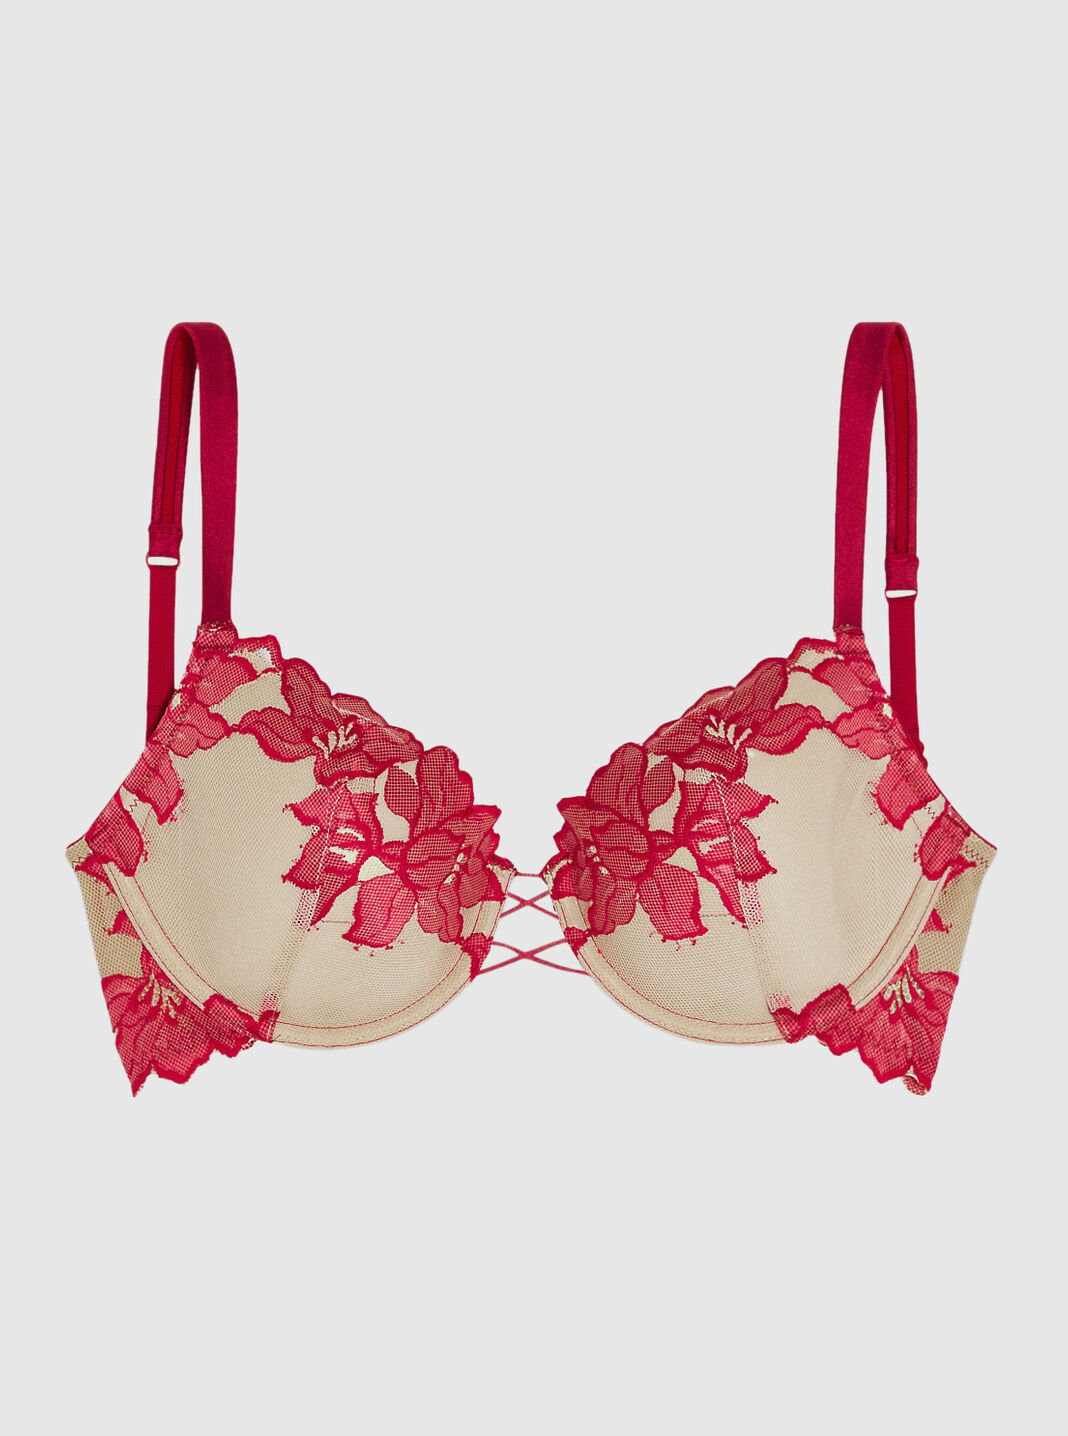 Buy AMIVYAA Women full coverage non padded bra Cotton Blend Red